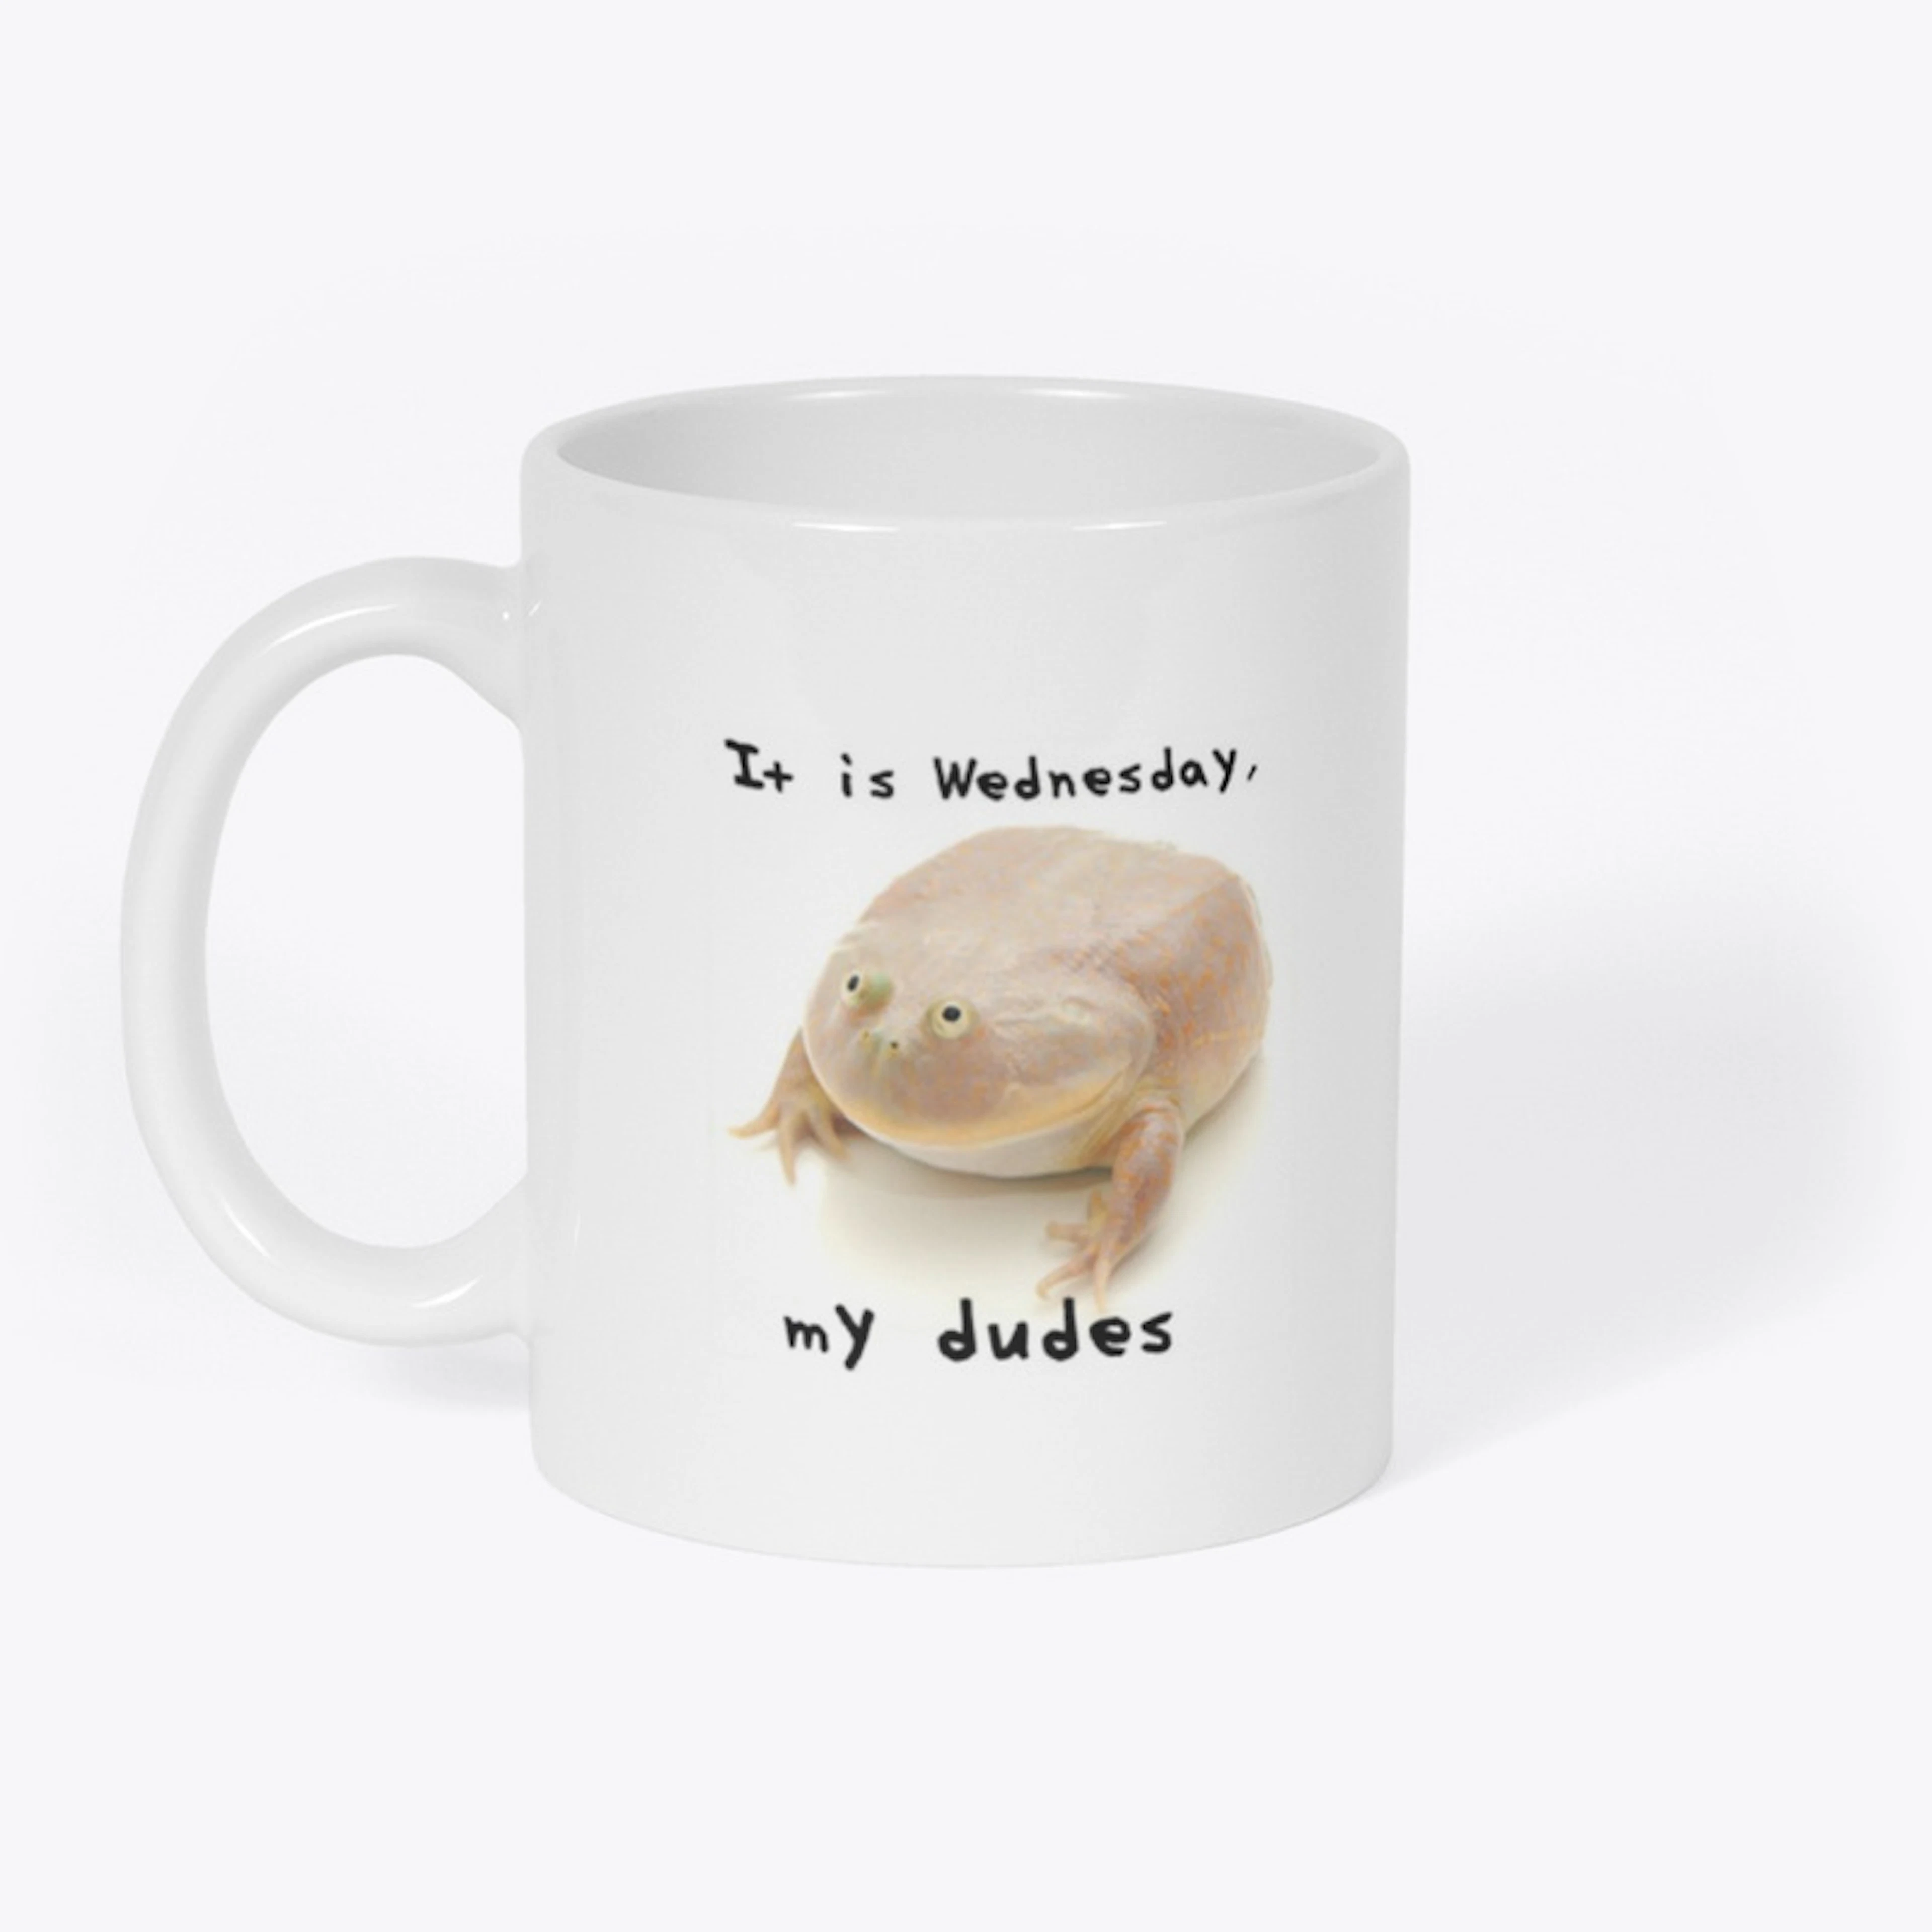 It is Wednesday, my dudes